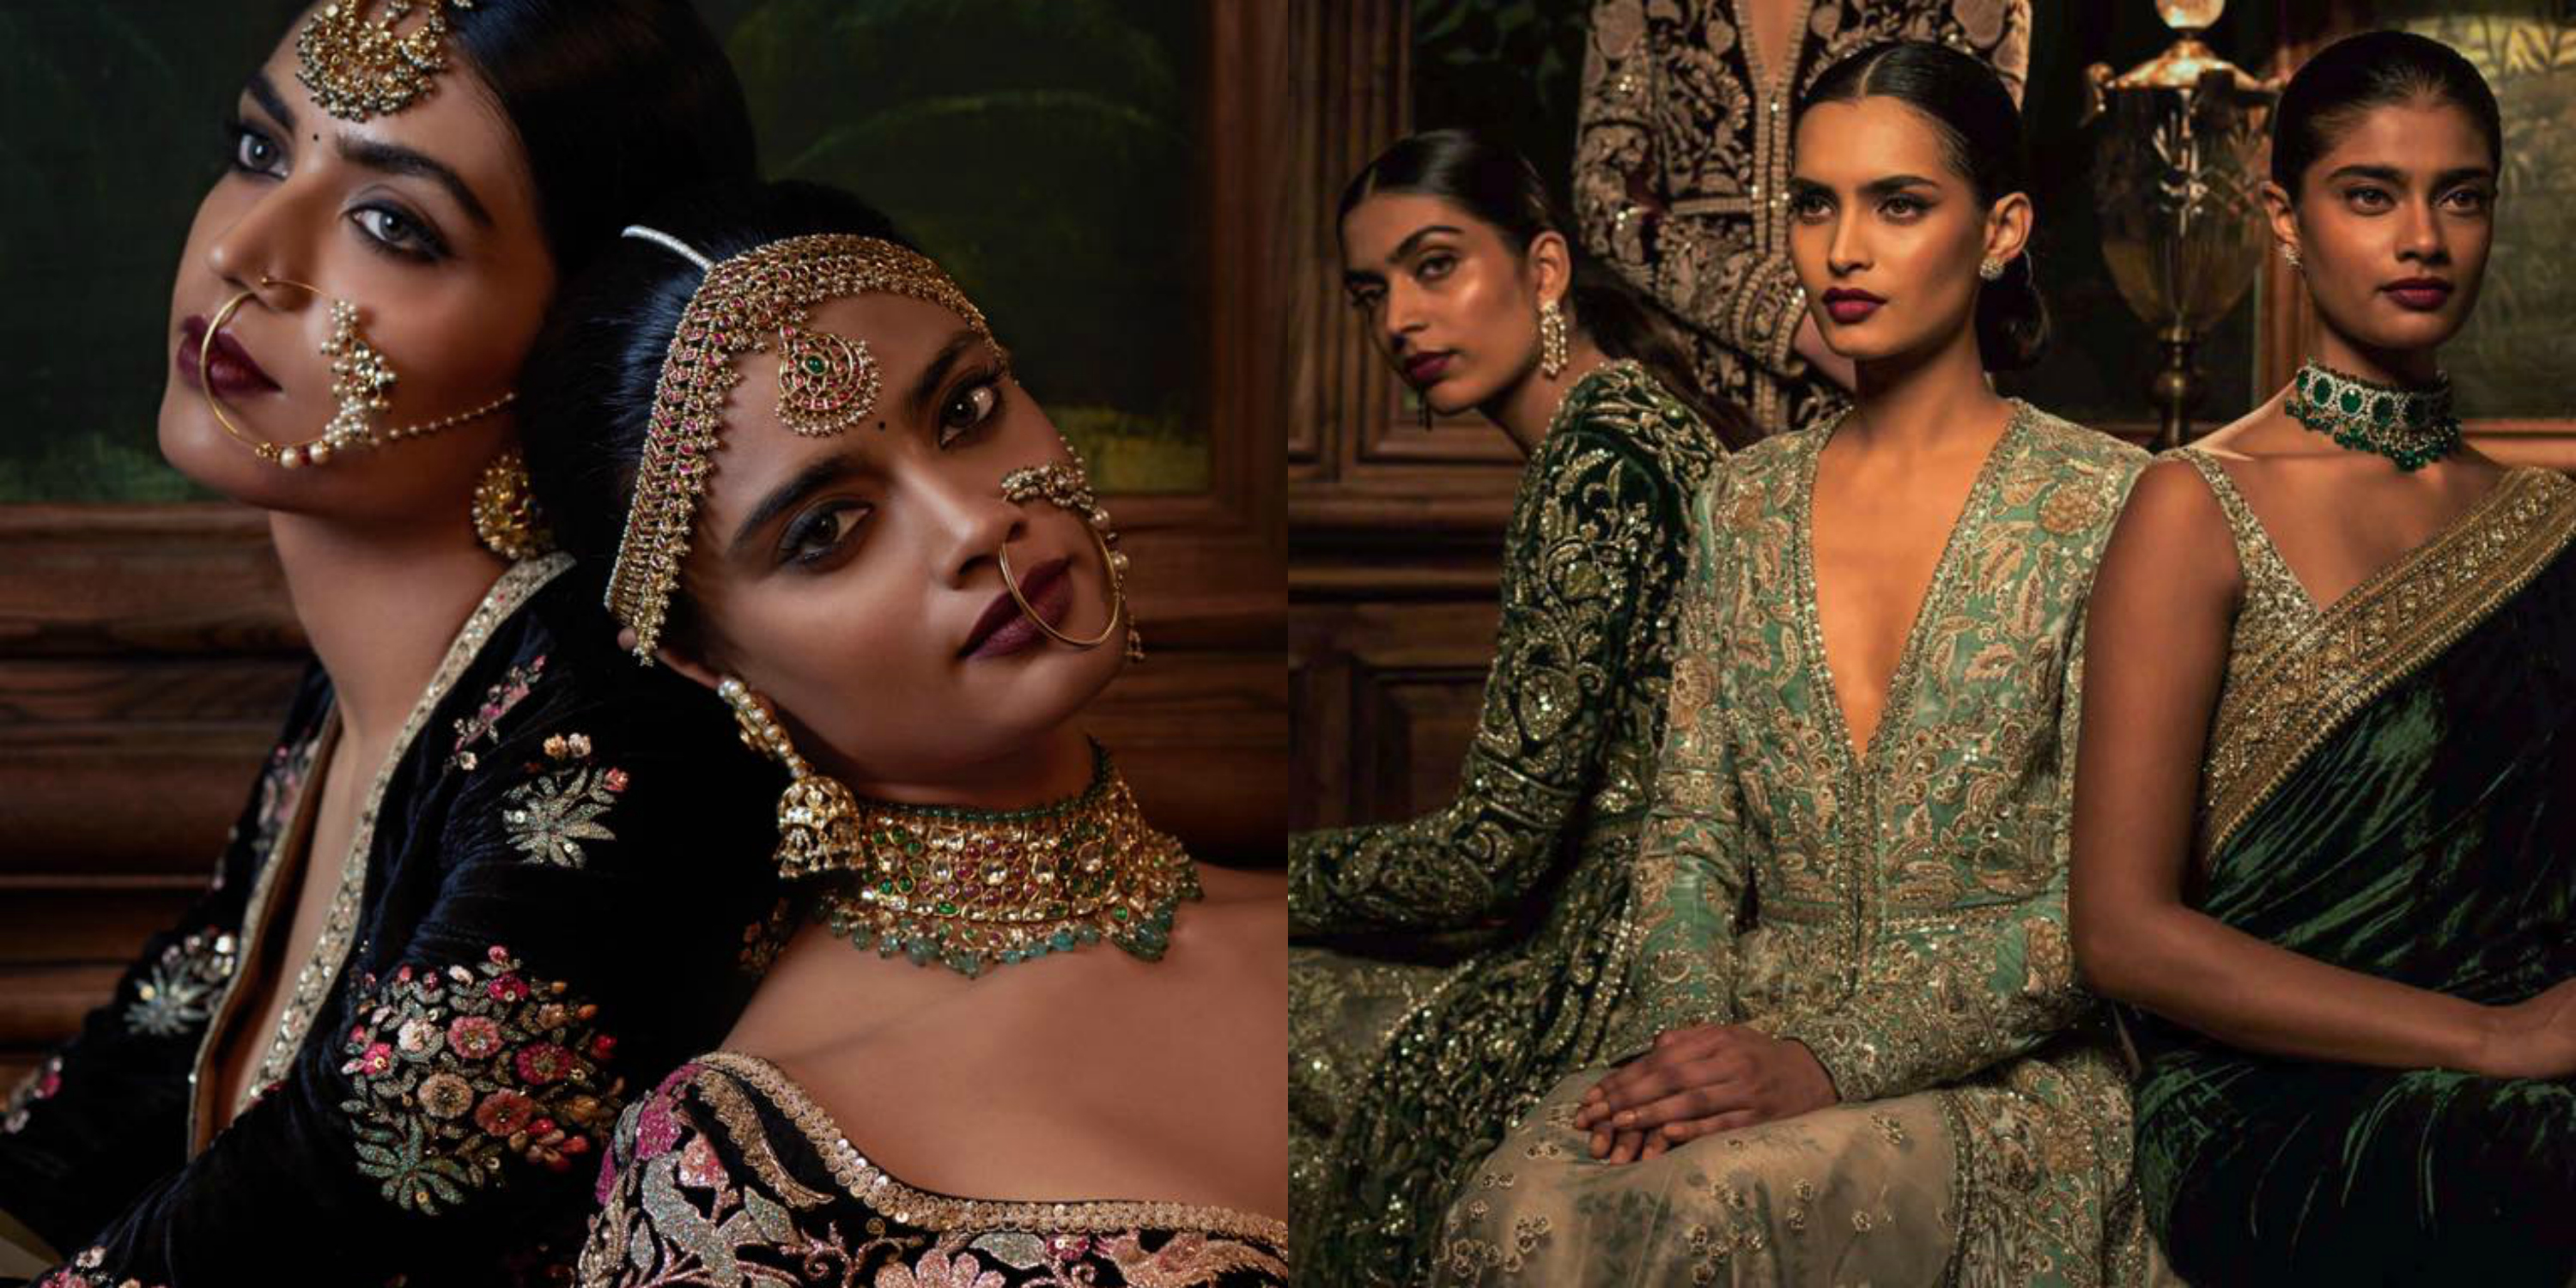 Daring To Be Dark Fighting Against Colorism In South Asian Cultures HuffPost Women